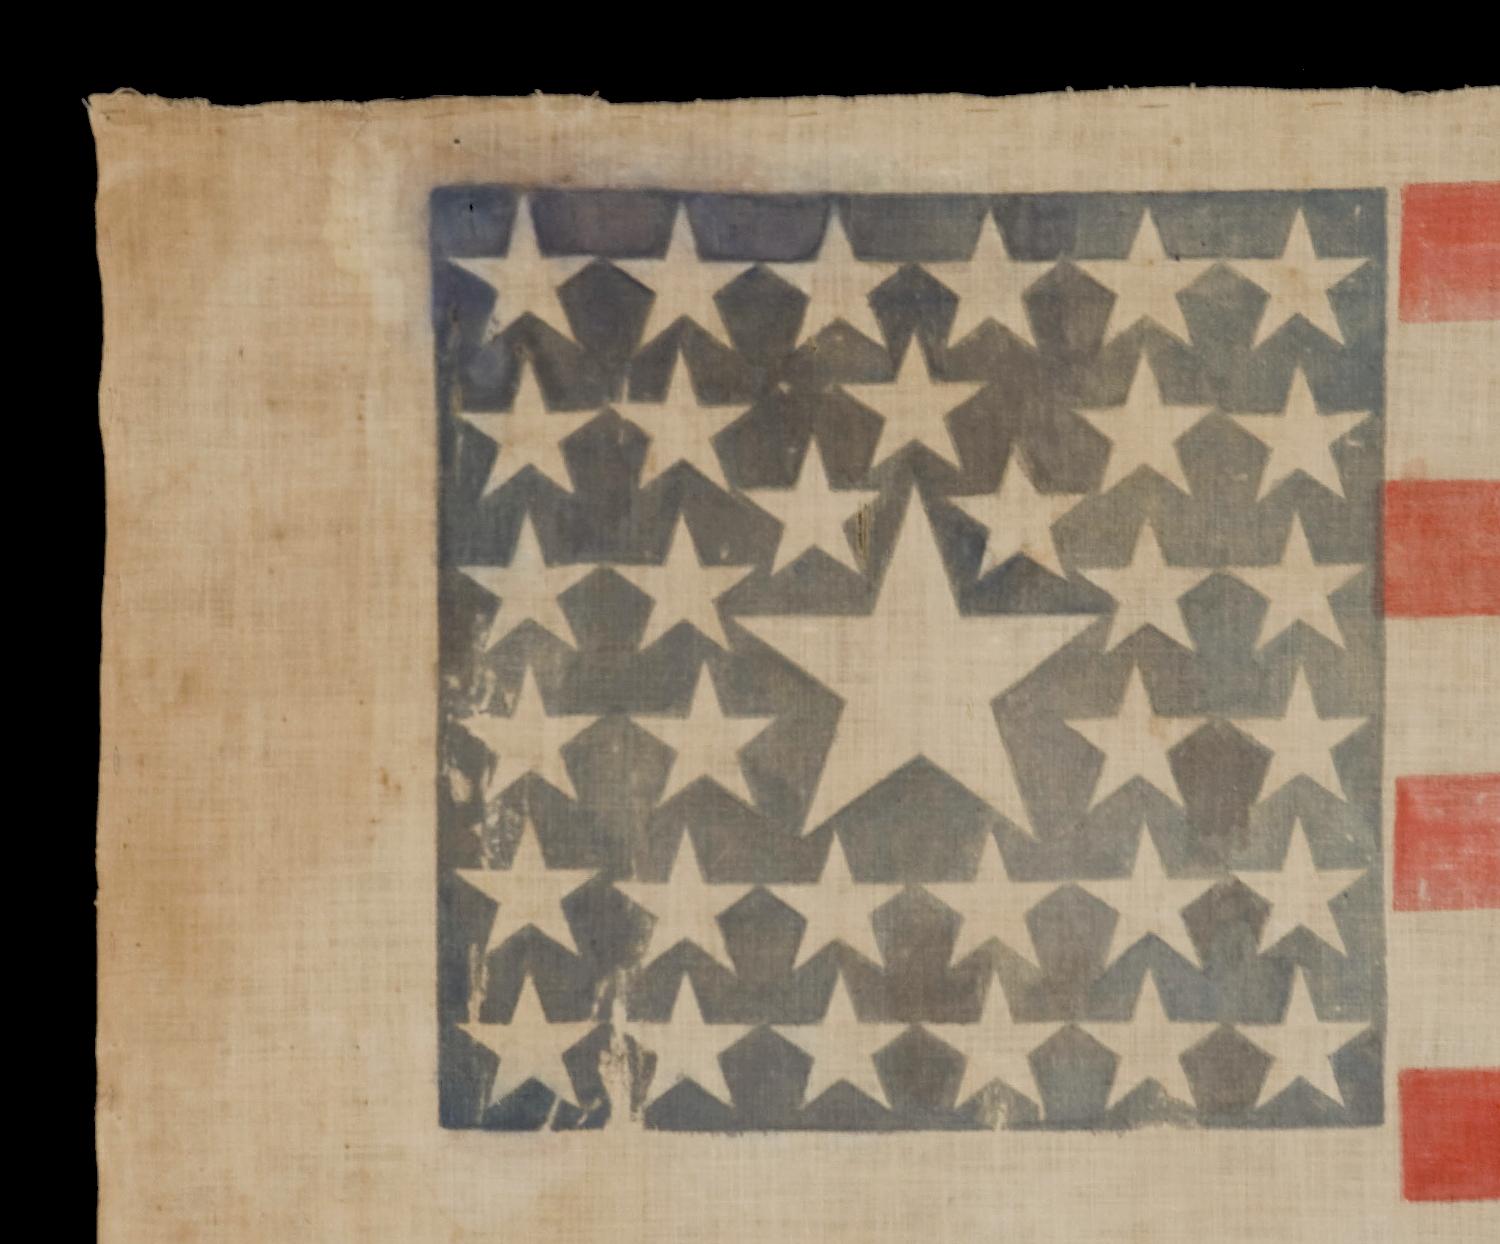 American 34 Star Flag with Stars in a Rare Pattern, Huge Center Star, Kansas Statehood